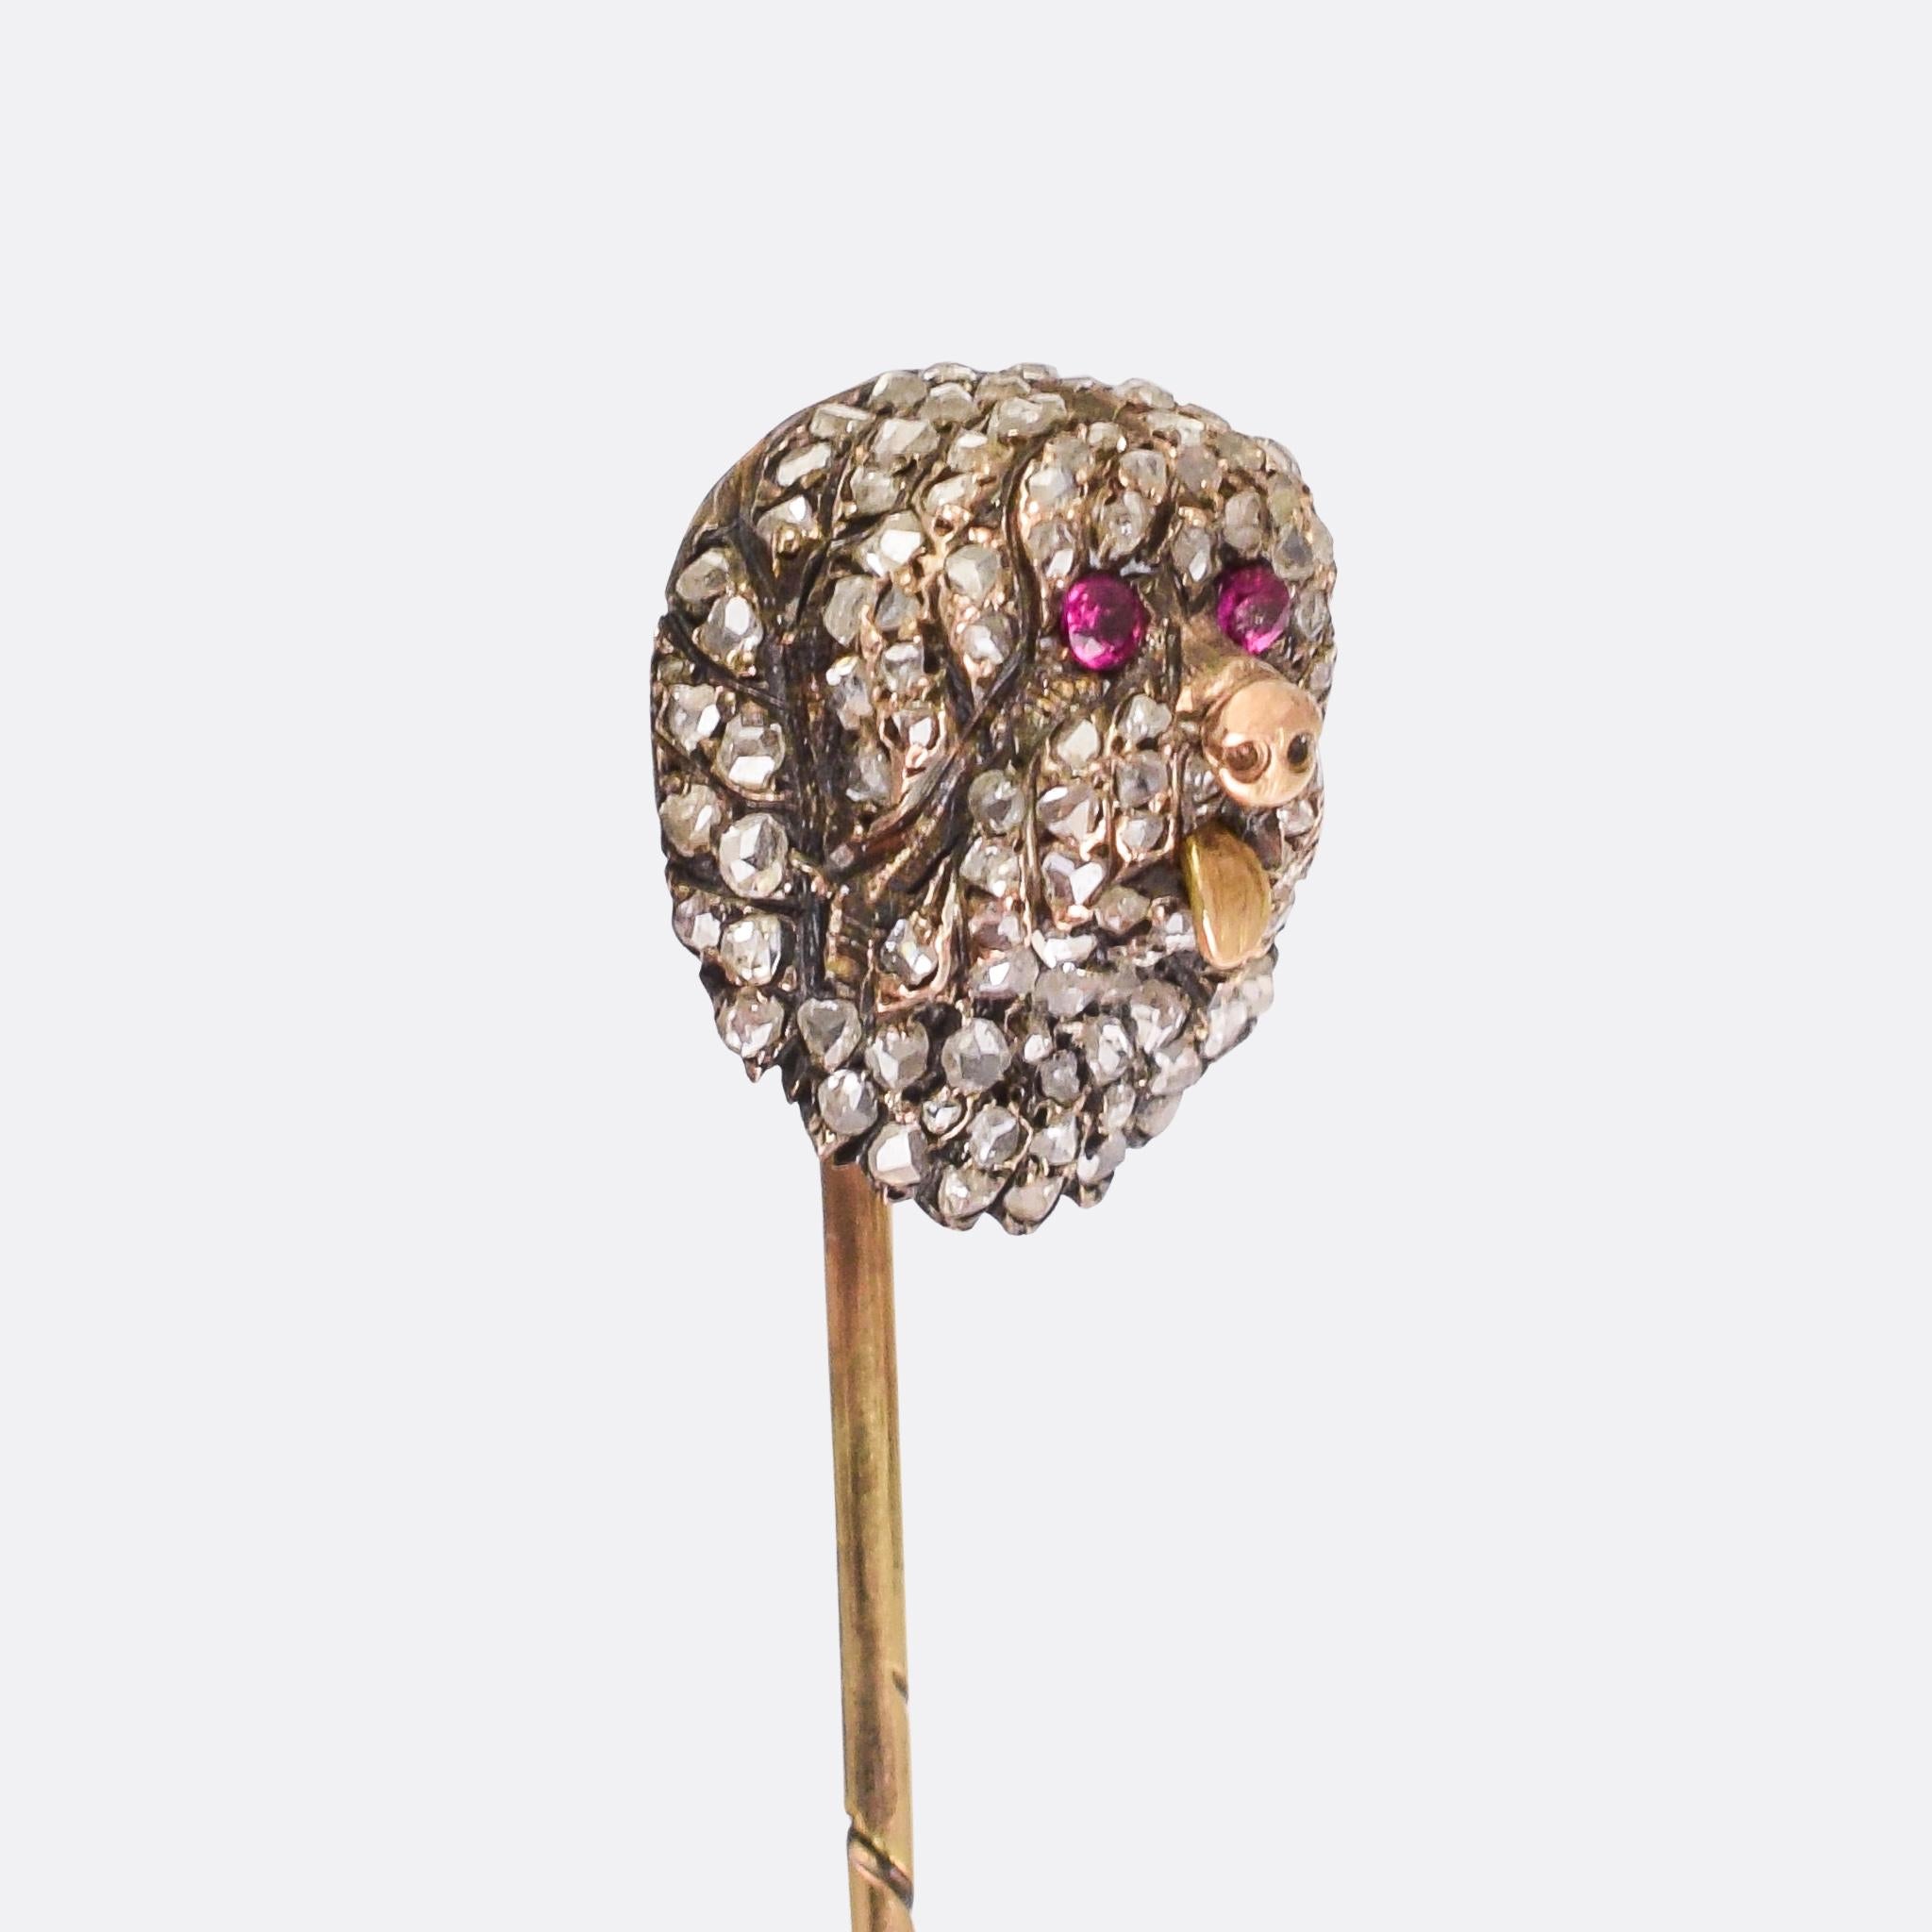 An incredible antique stick pin... modelled as a Tibetan Mastiff, fully set with rose cut diamonds and with ruby eyes. The craftsmanship is exceptional; the face protrudes in high relief, with stunning detail and diamonds set everywhere, even under